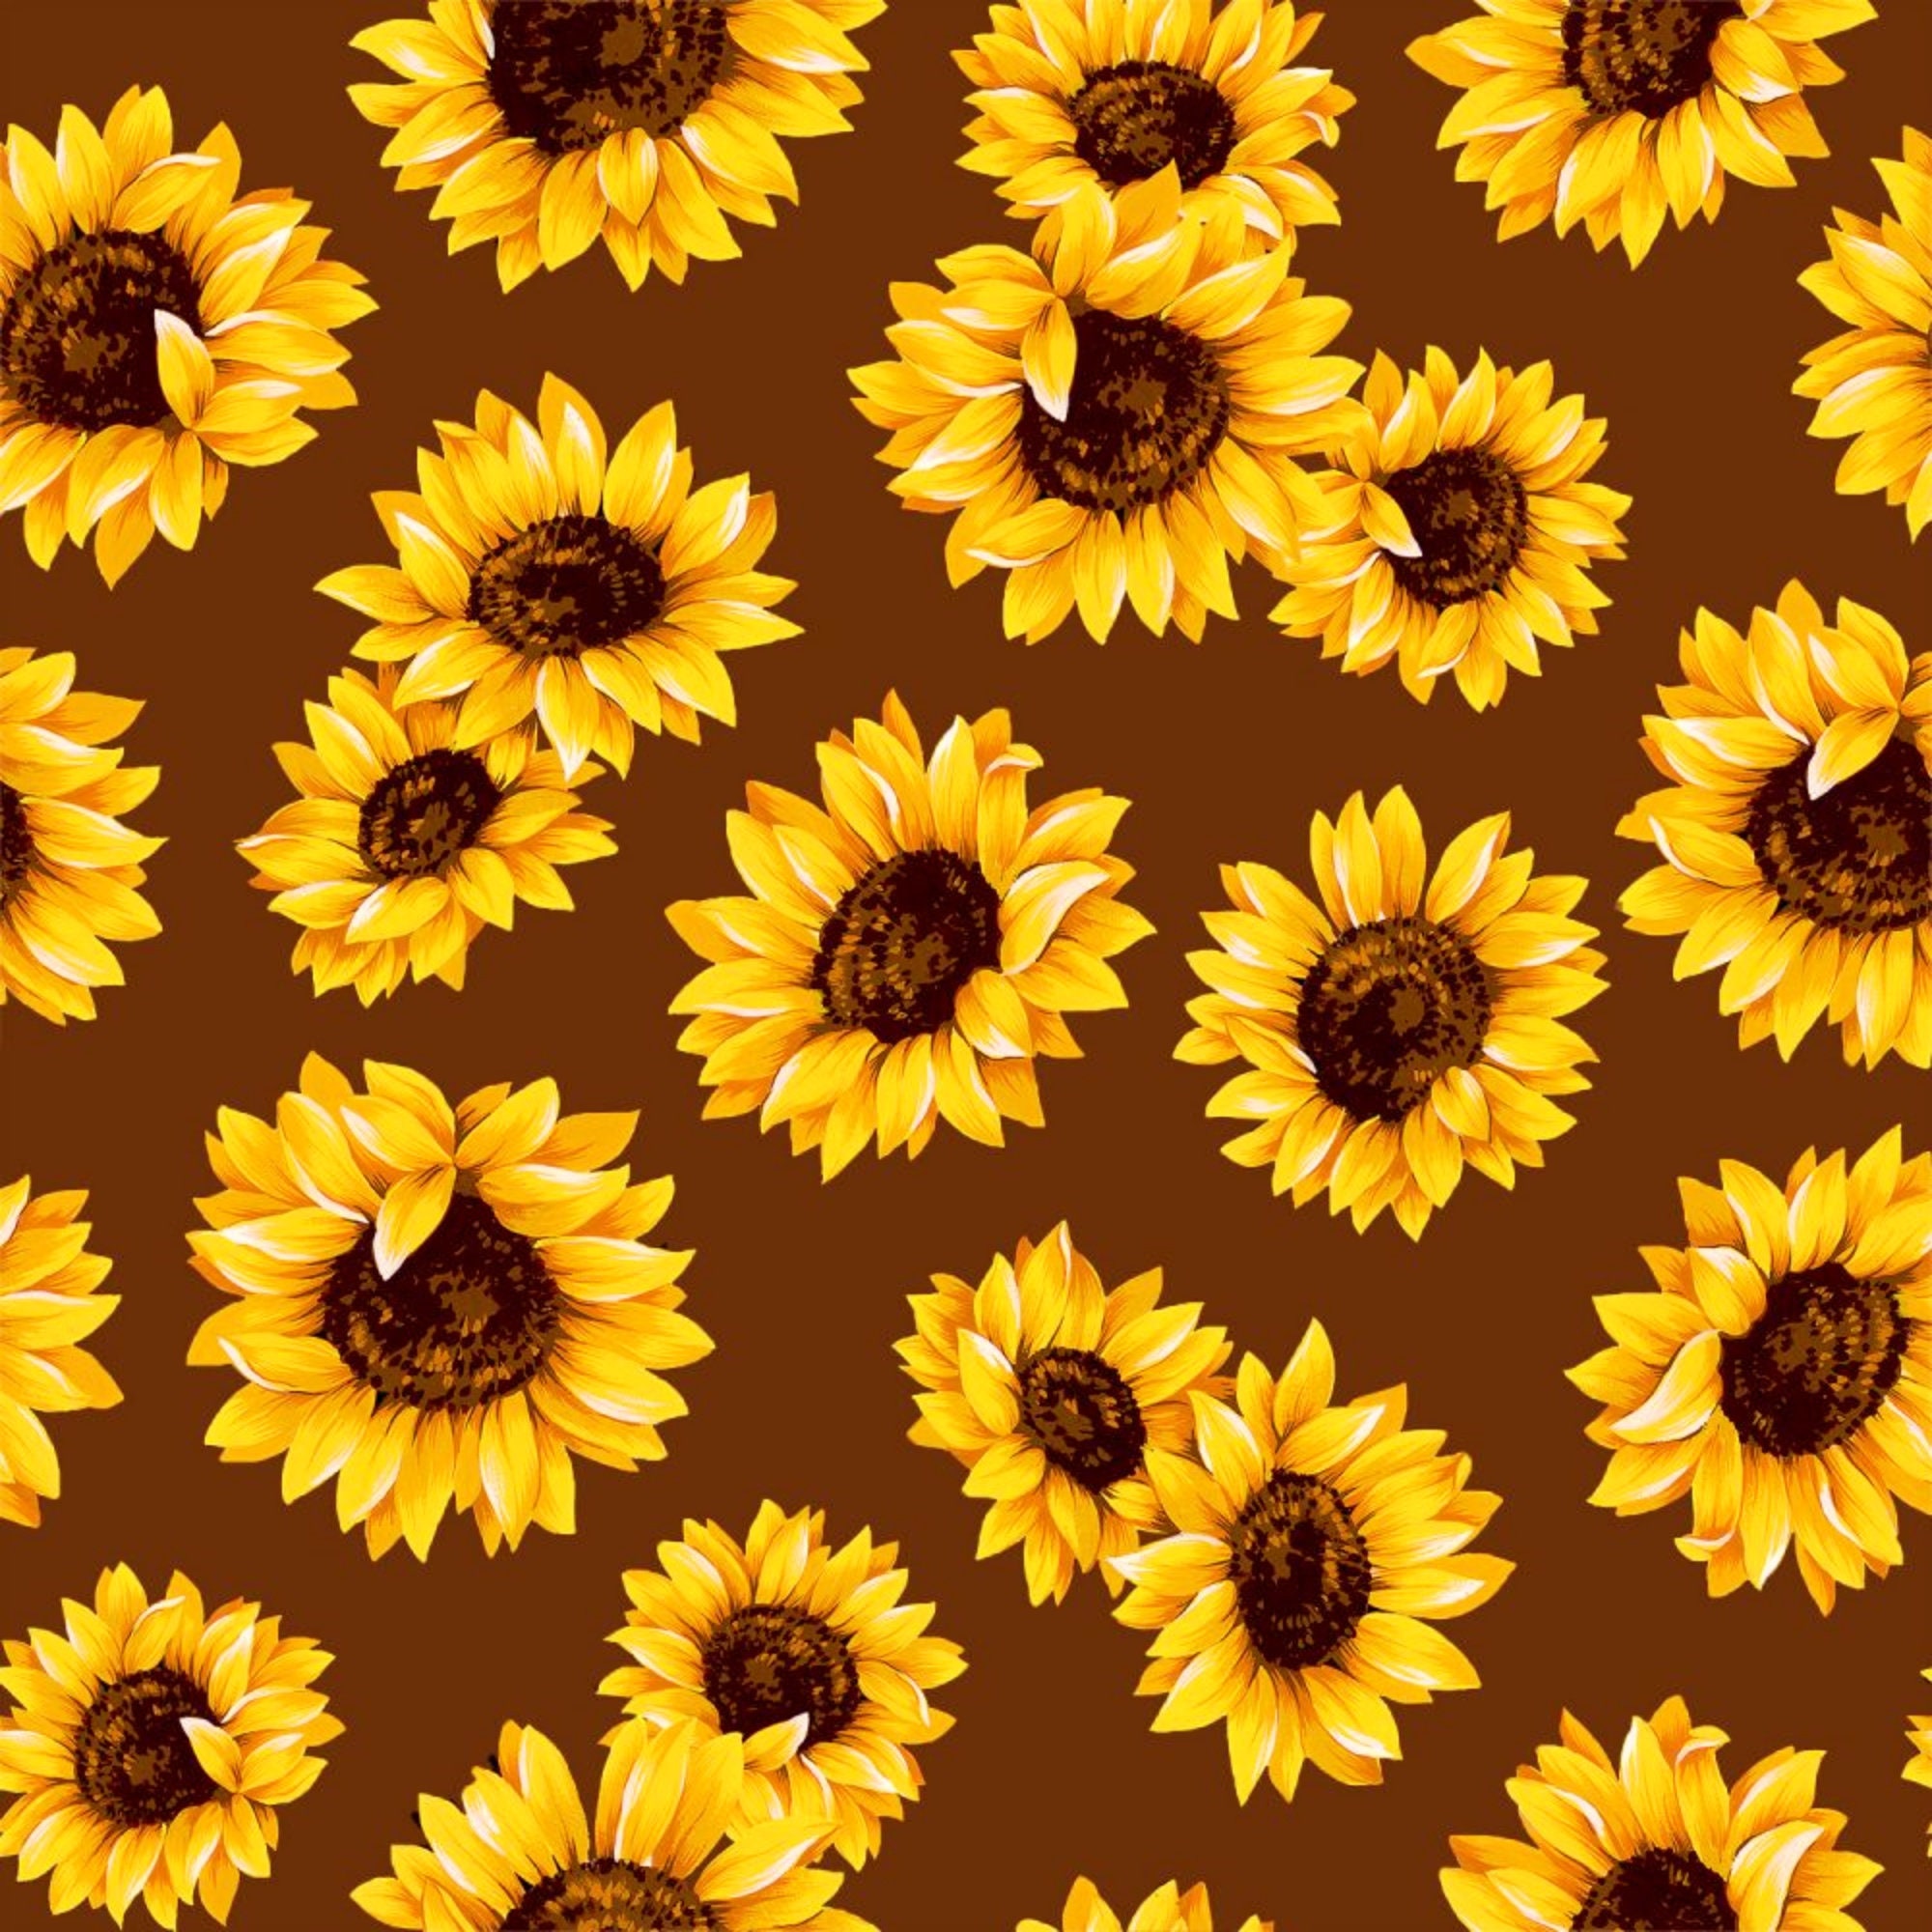 Sunflowers on Brown Fabric by the Yard 100% Quilt Cotton | Etsy